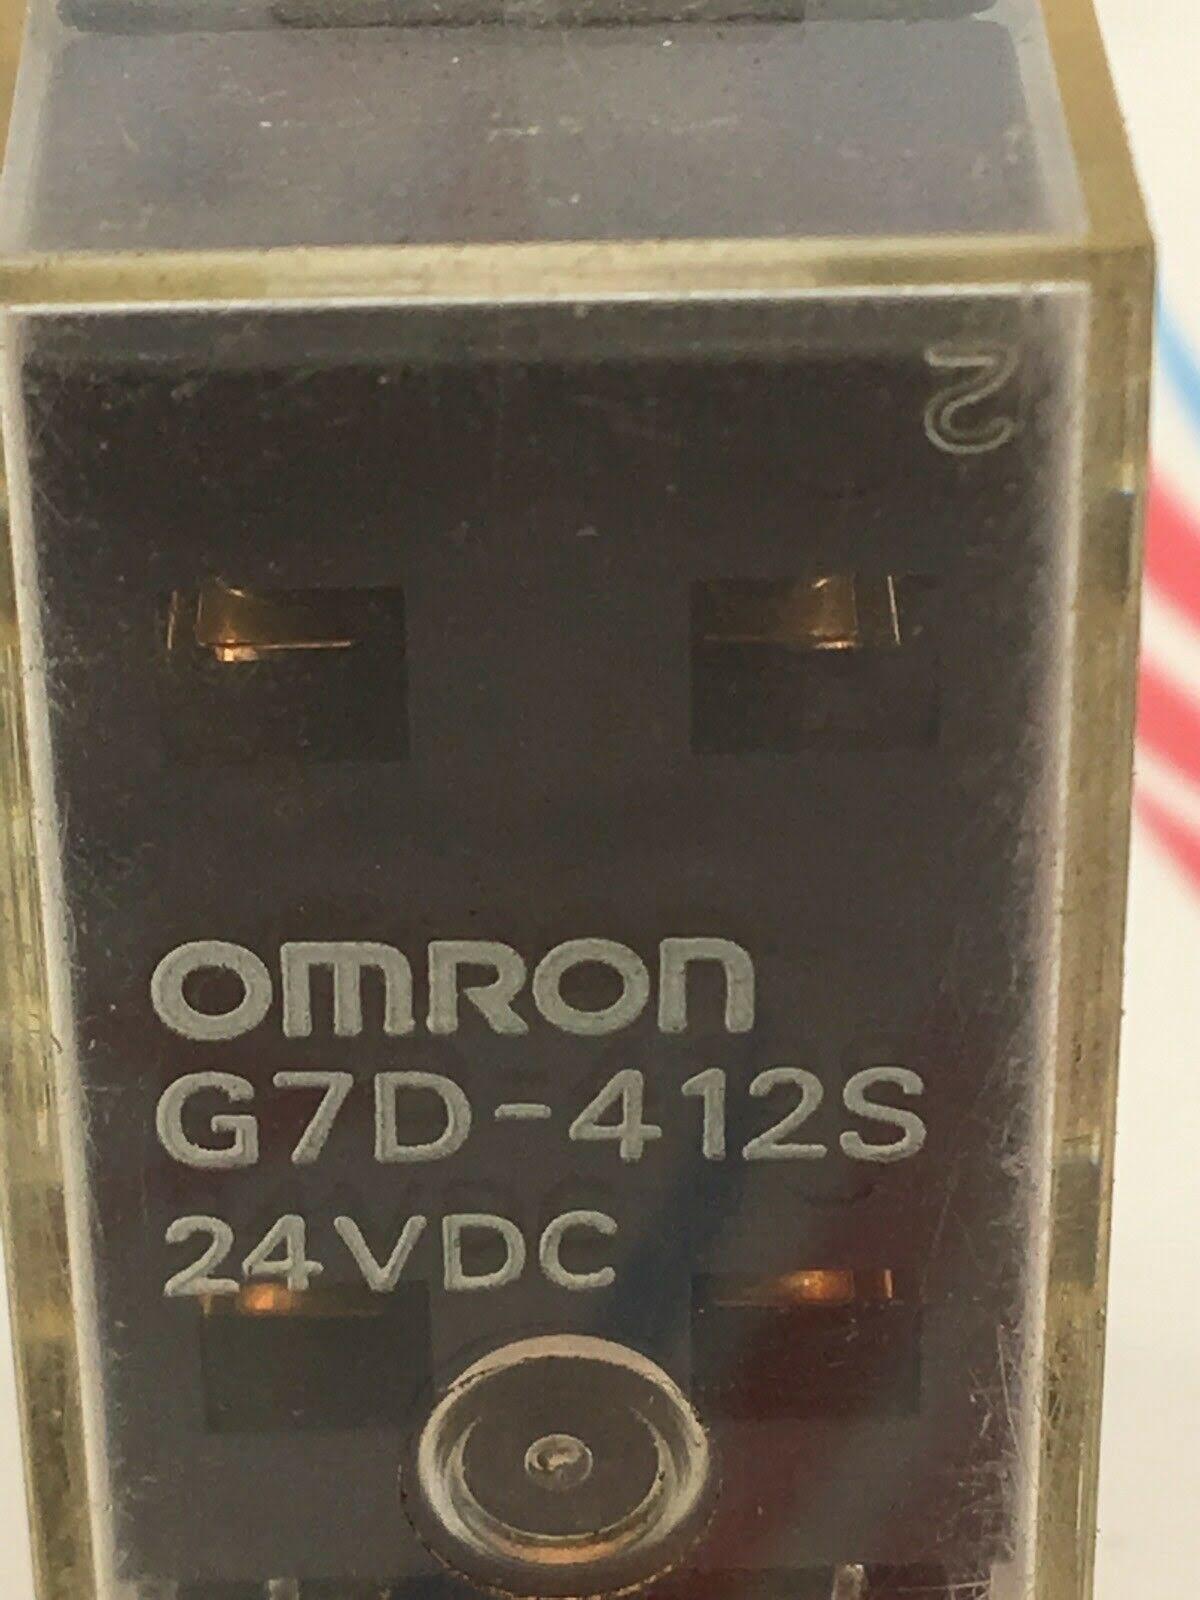 24vdc-Safety relay-D' OCCASION Omron-g7d-412s 